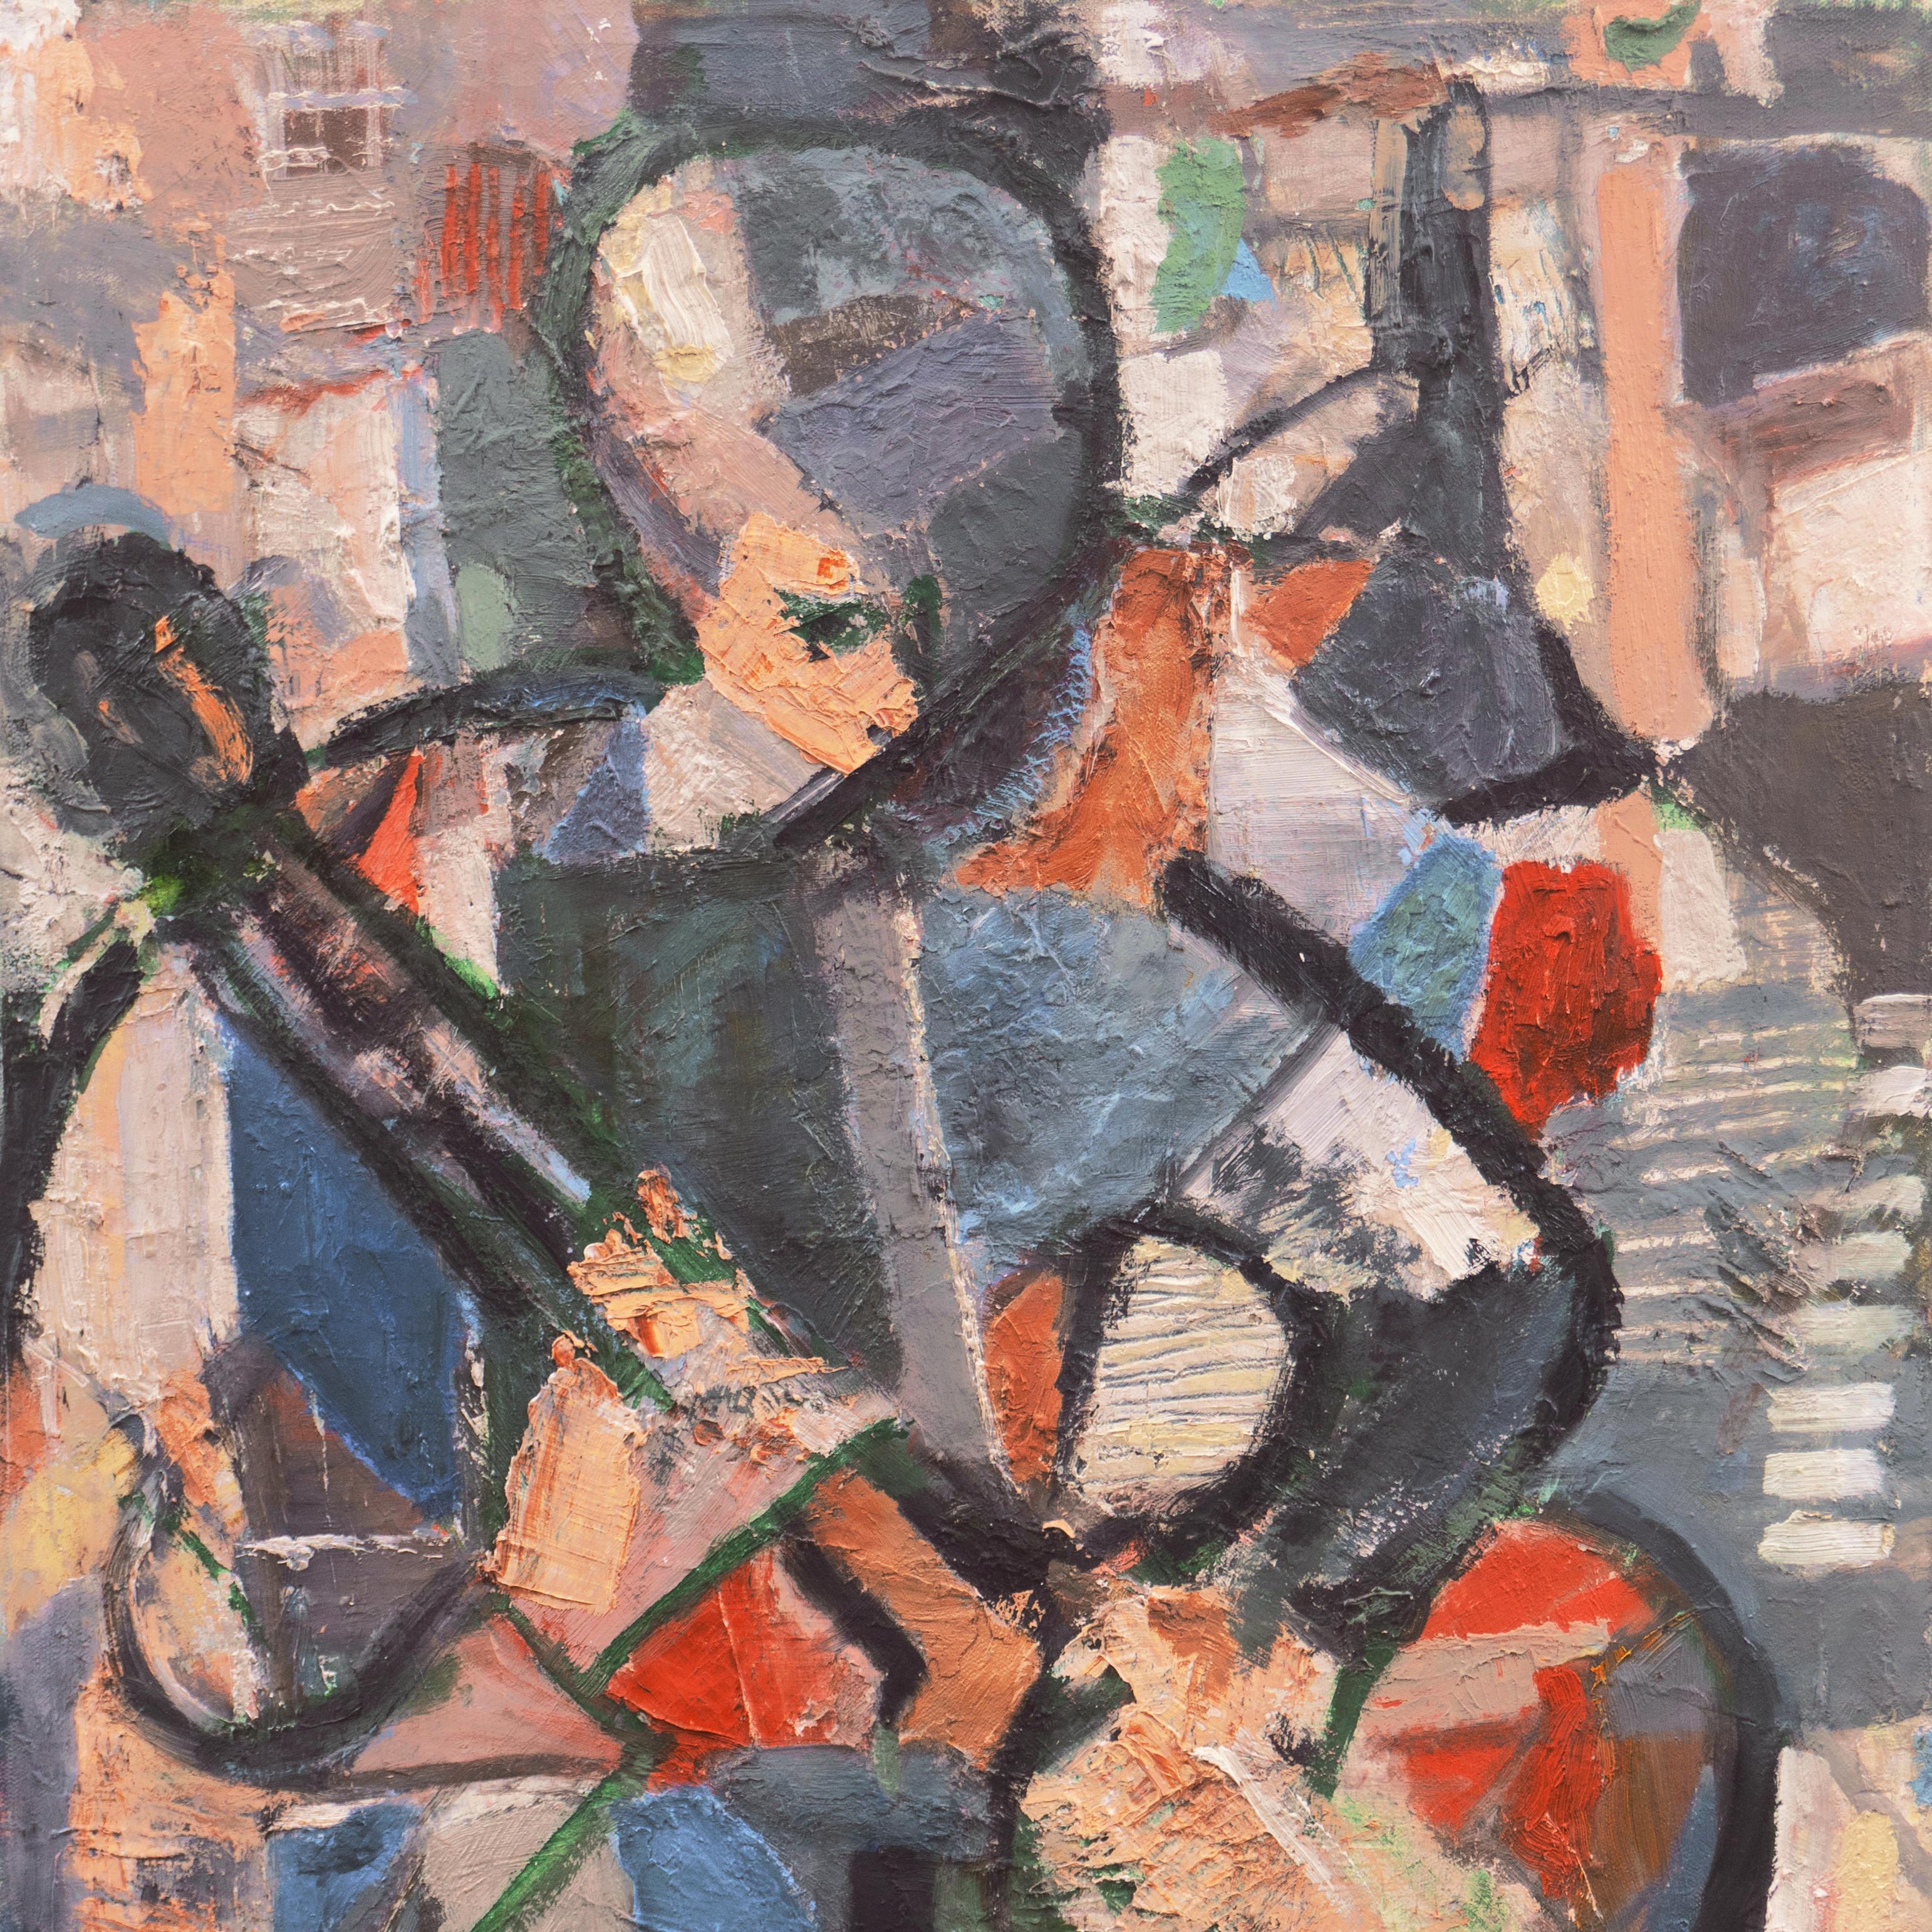 'Man Playing a Banjo', American Mid-Century Cubist-Derived Figural Oil, Fifties - Gray Figurative Painting by Paula Melcher